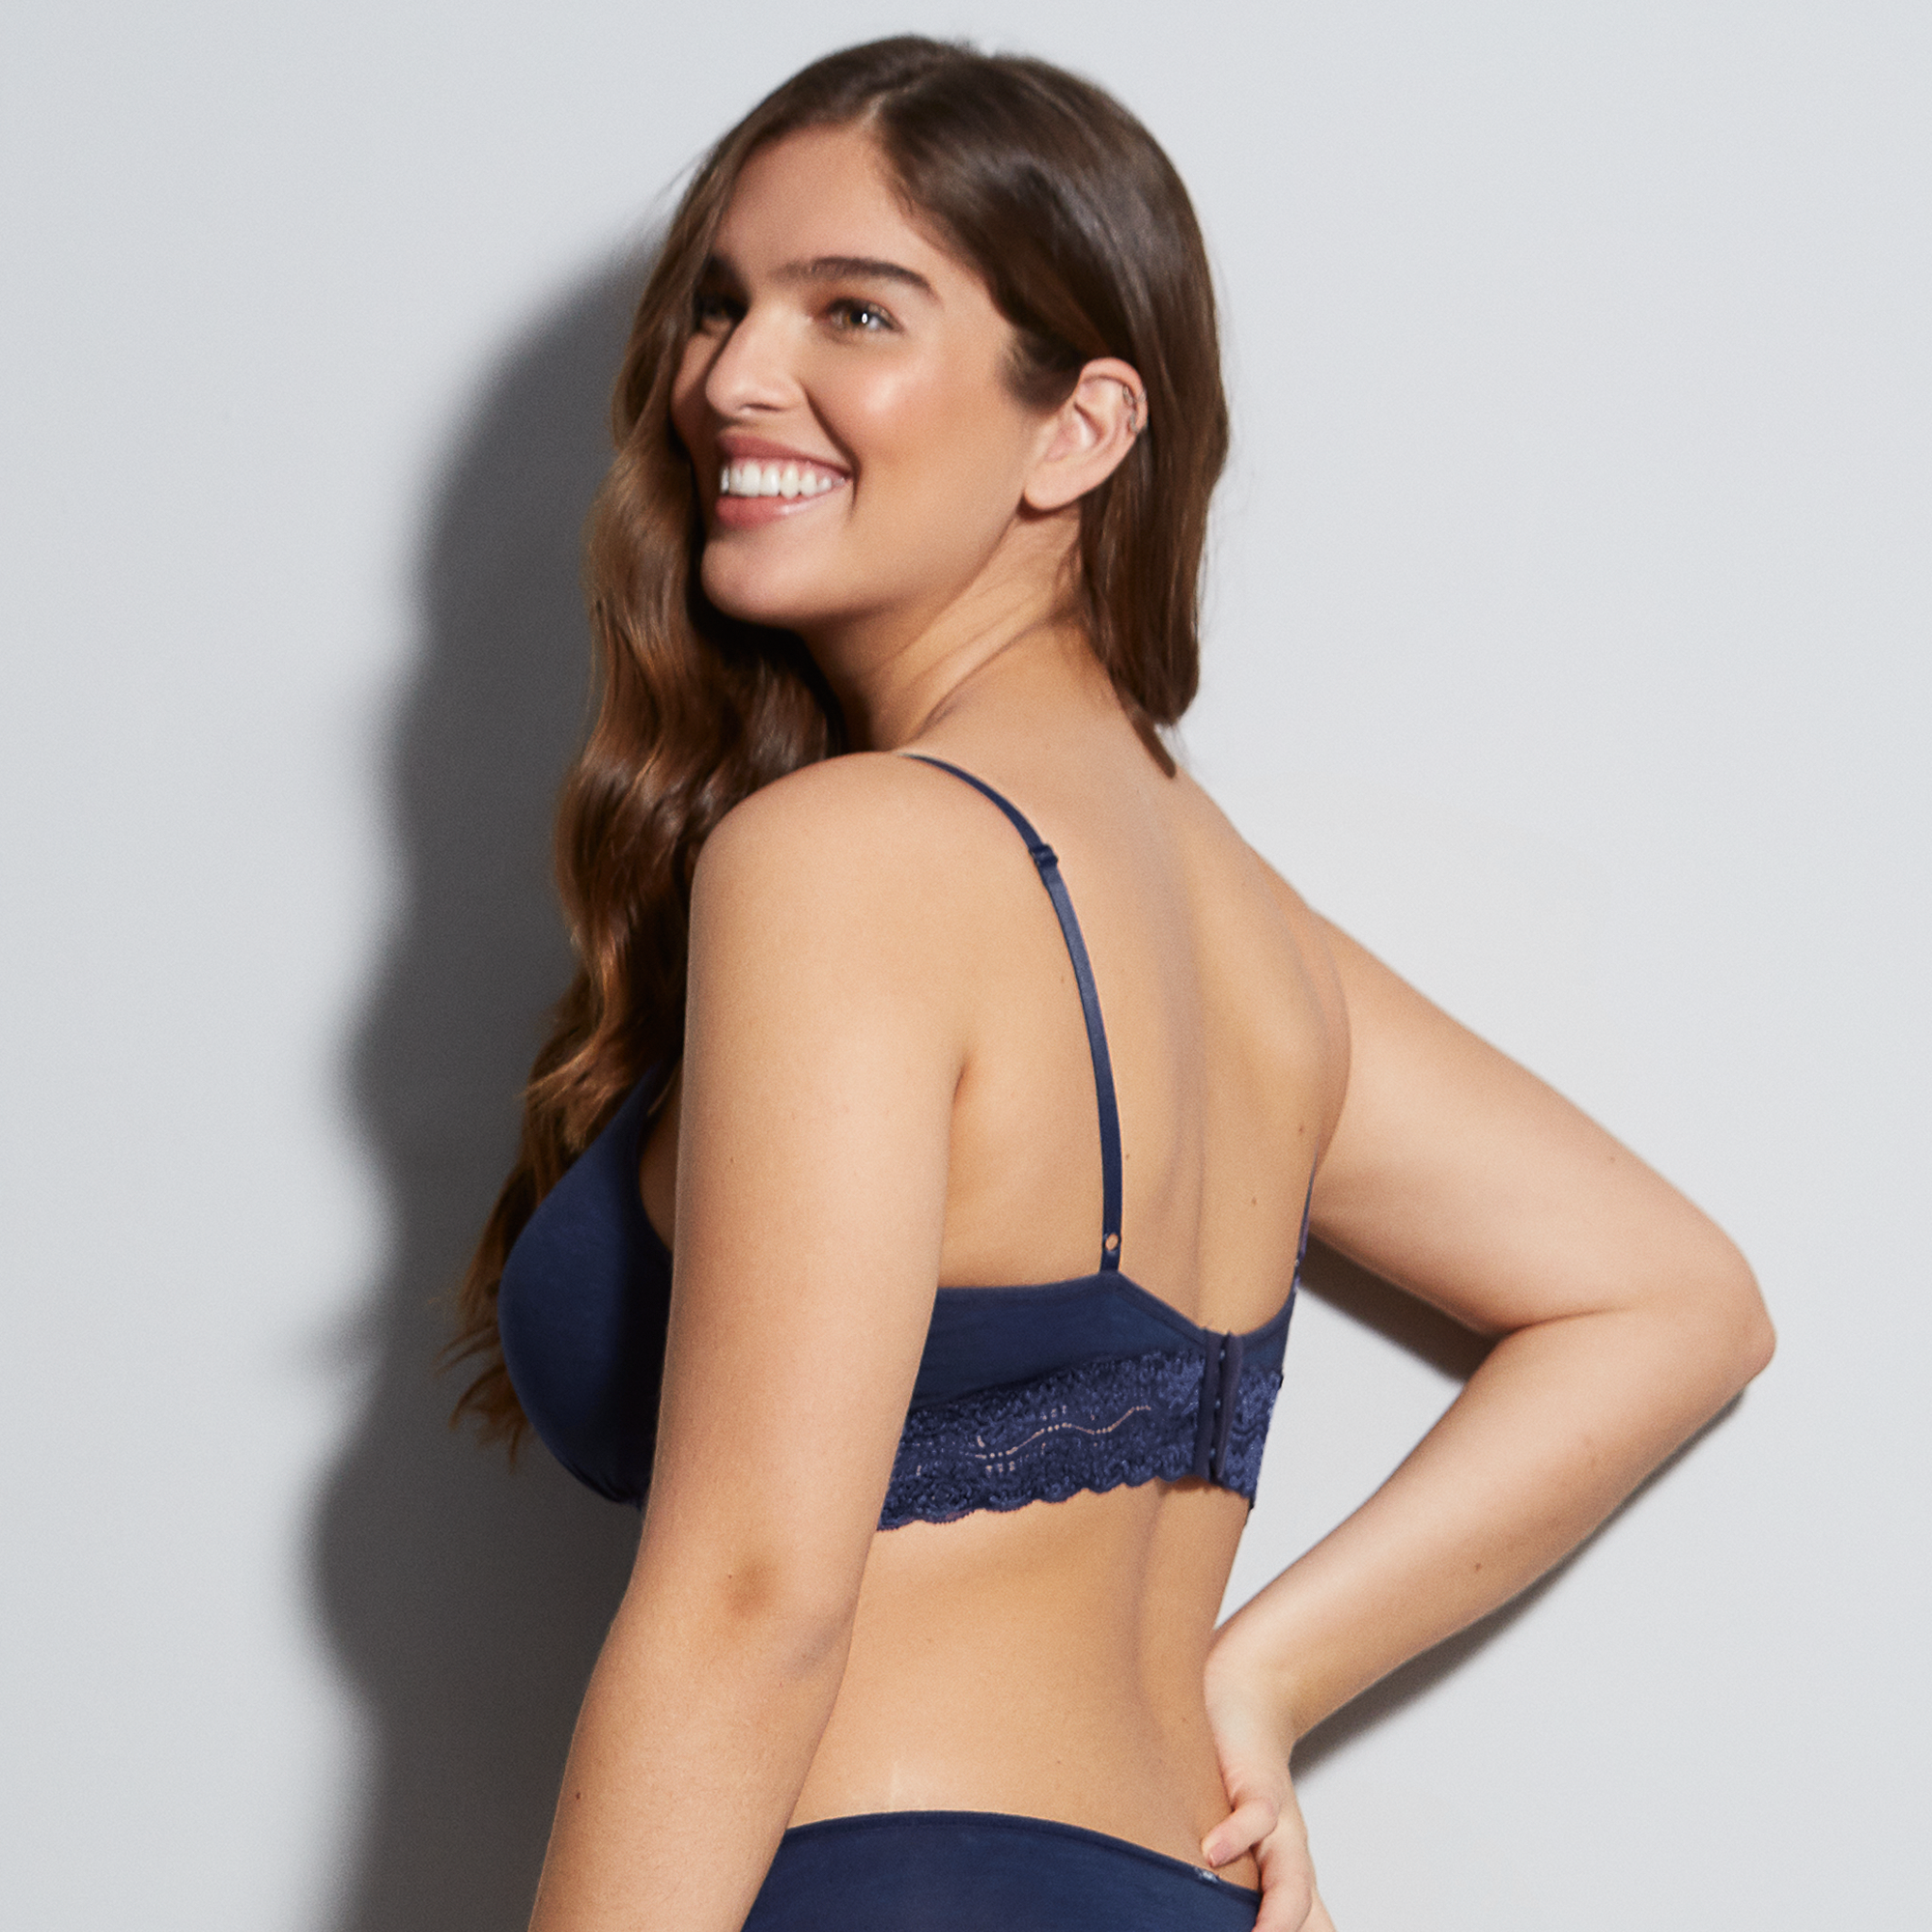 LACE WIRELESS BRALETTE - 28320 – The BFF Company